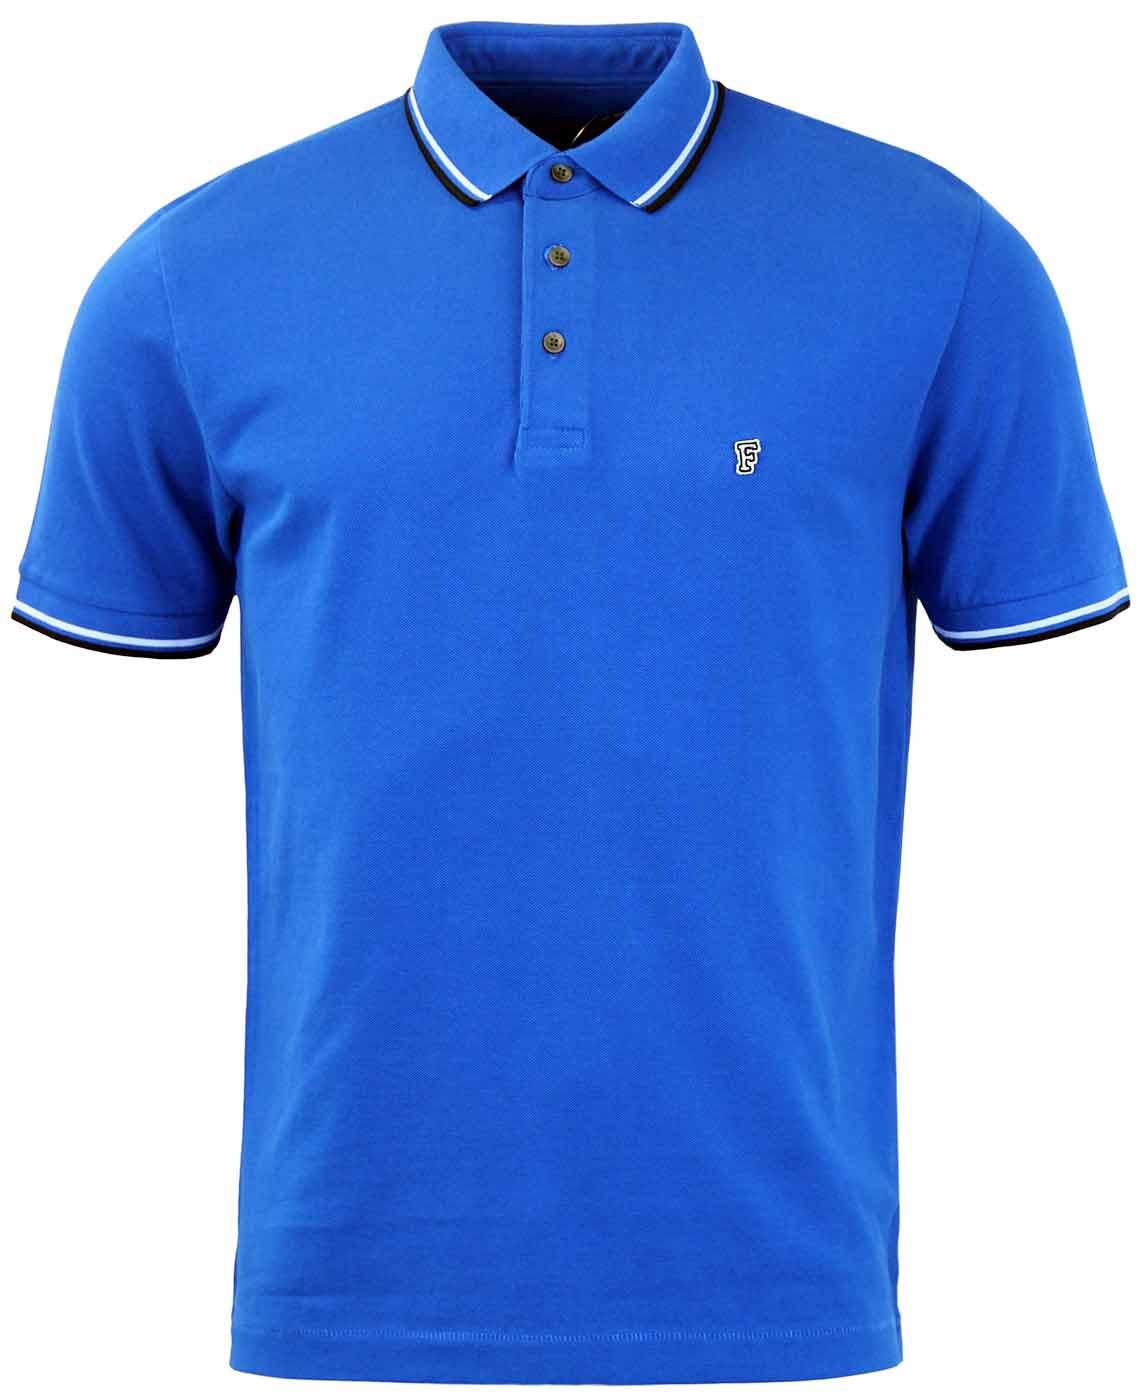 FRENCH CONNECTION Retro Mod Tipped Polo Shirt in Blue